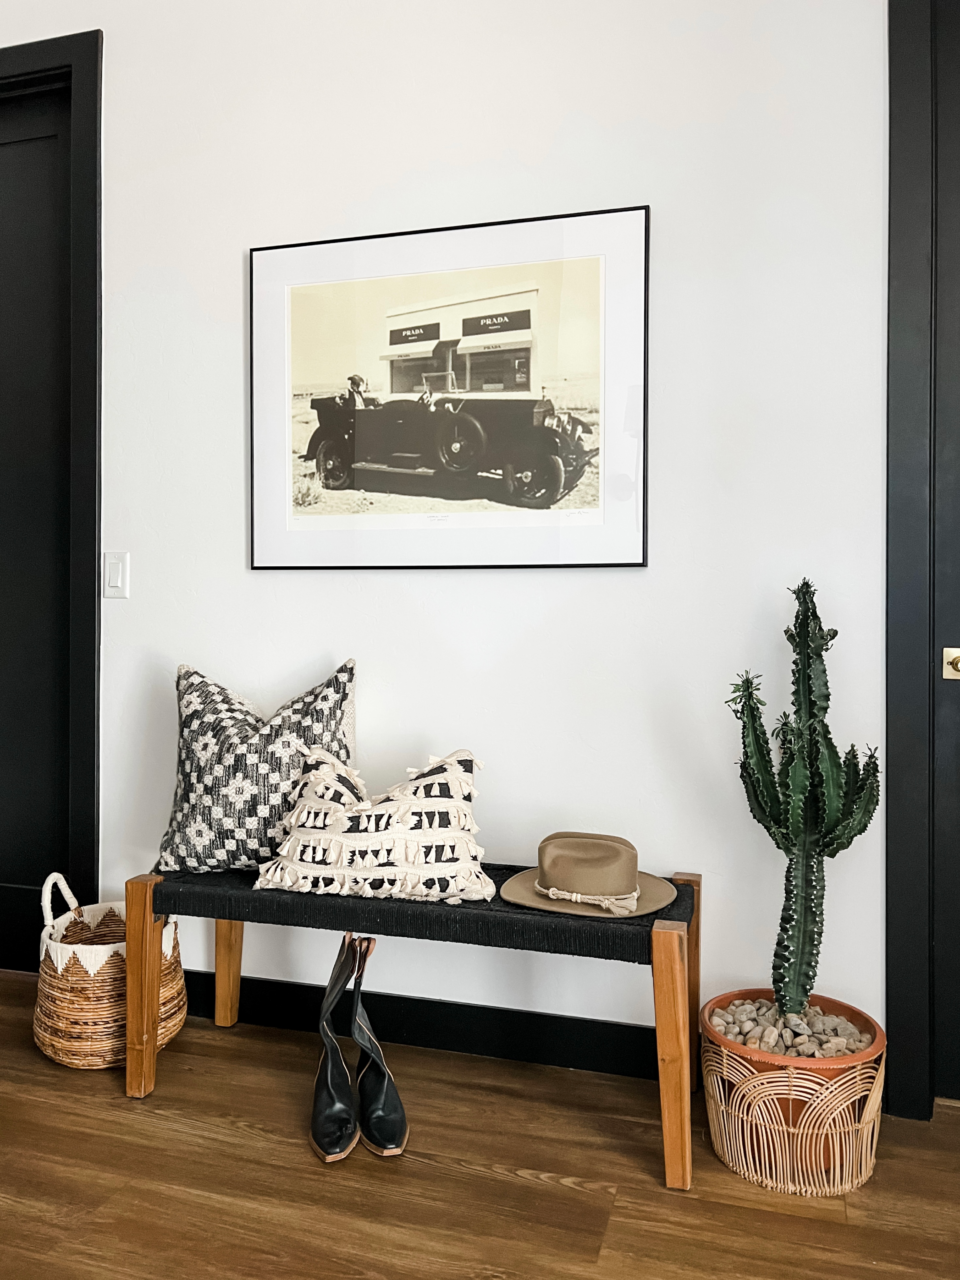 Southwestern decor with a cactus and framed vintage art print.